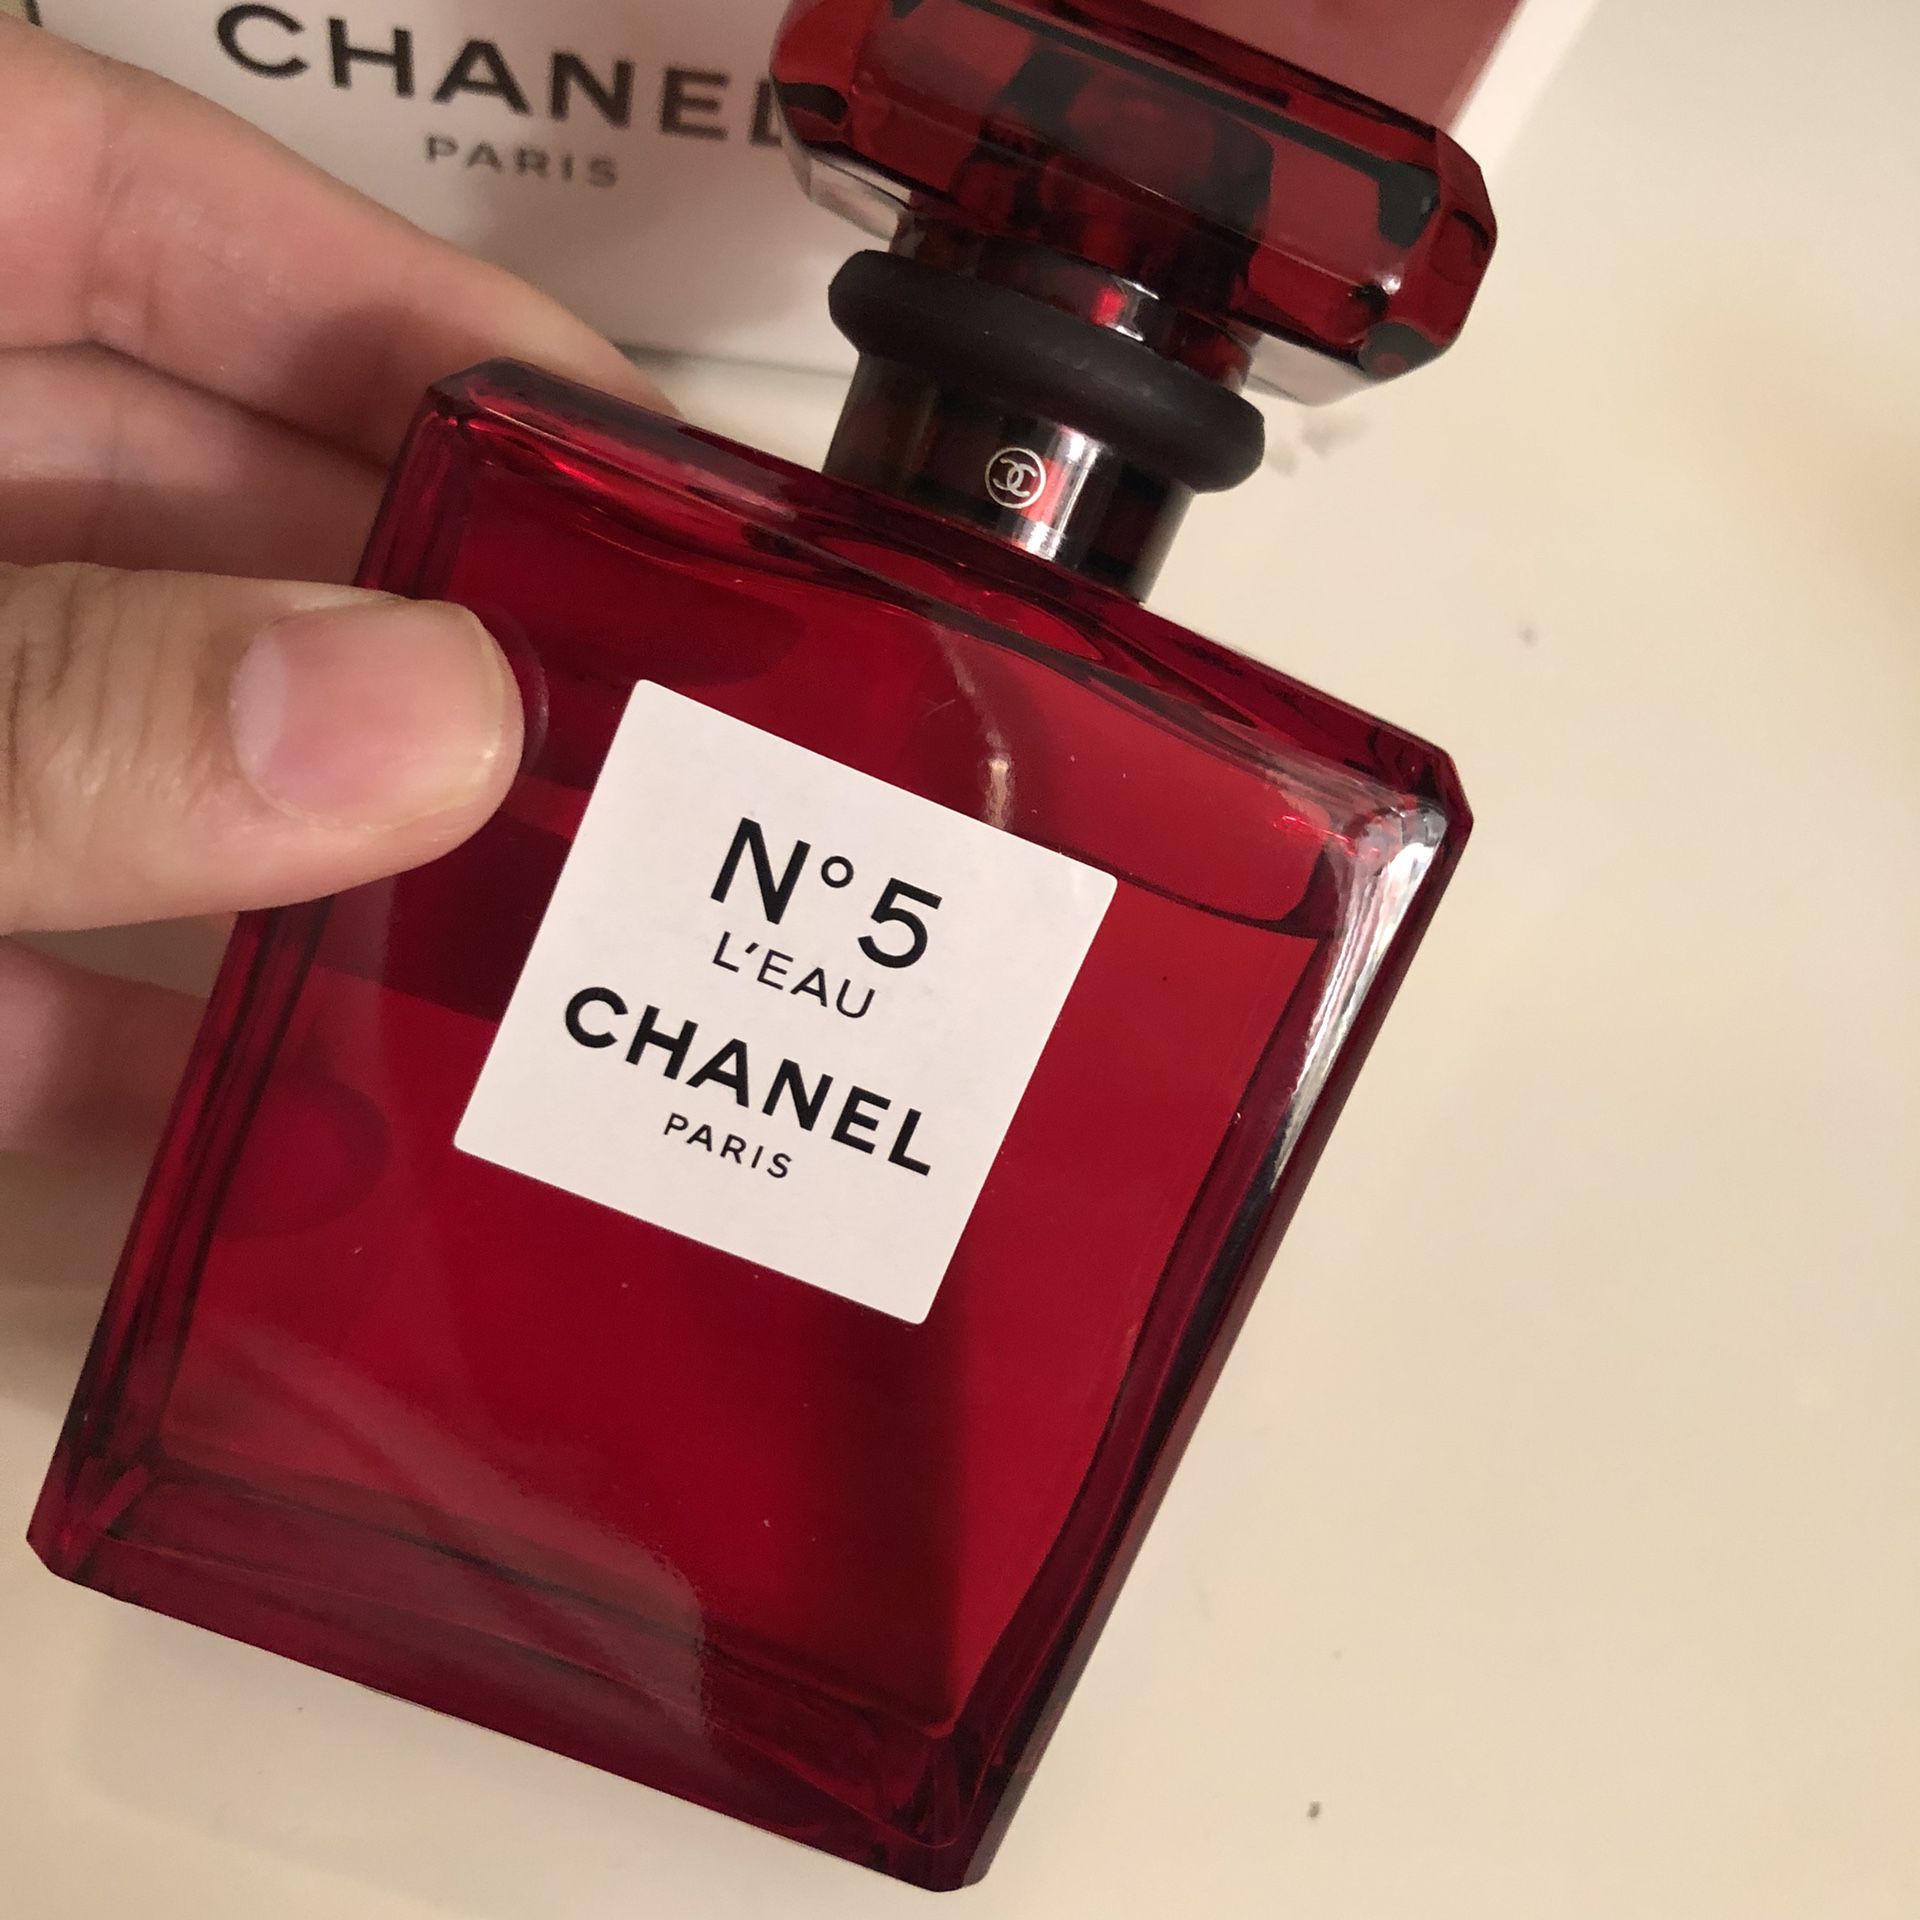 CHANEL N°5 Red Edition Perfume Spray 3.4 Oz./100ml *Sealed Box* 3.4fl Oz  for Sale in Monterey Park, CA - OfferUp